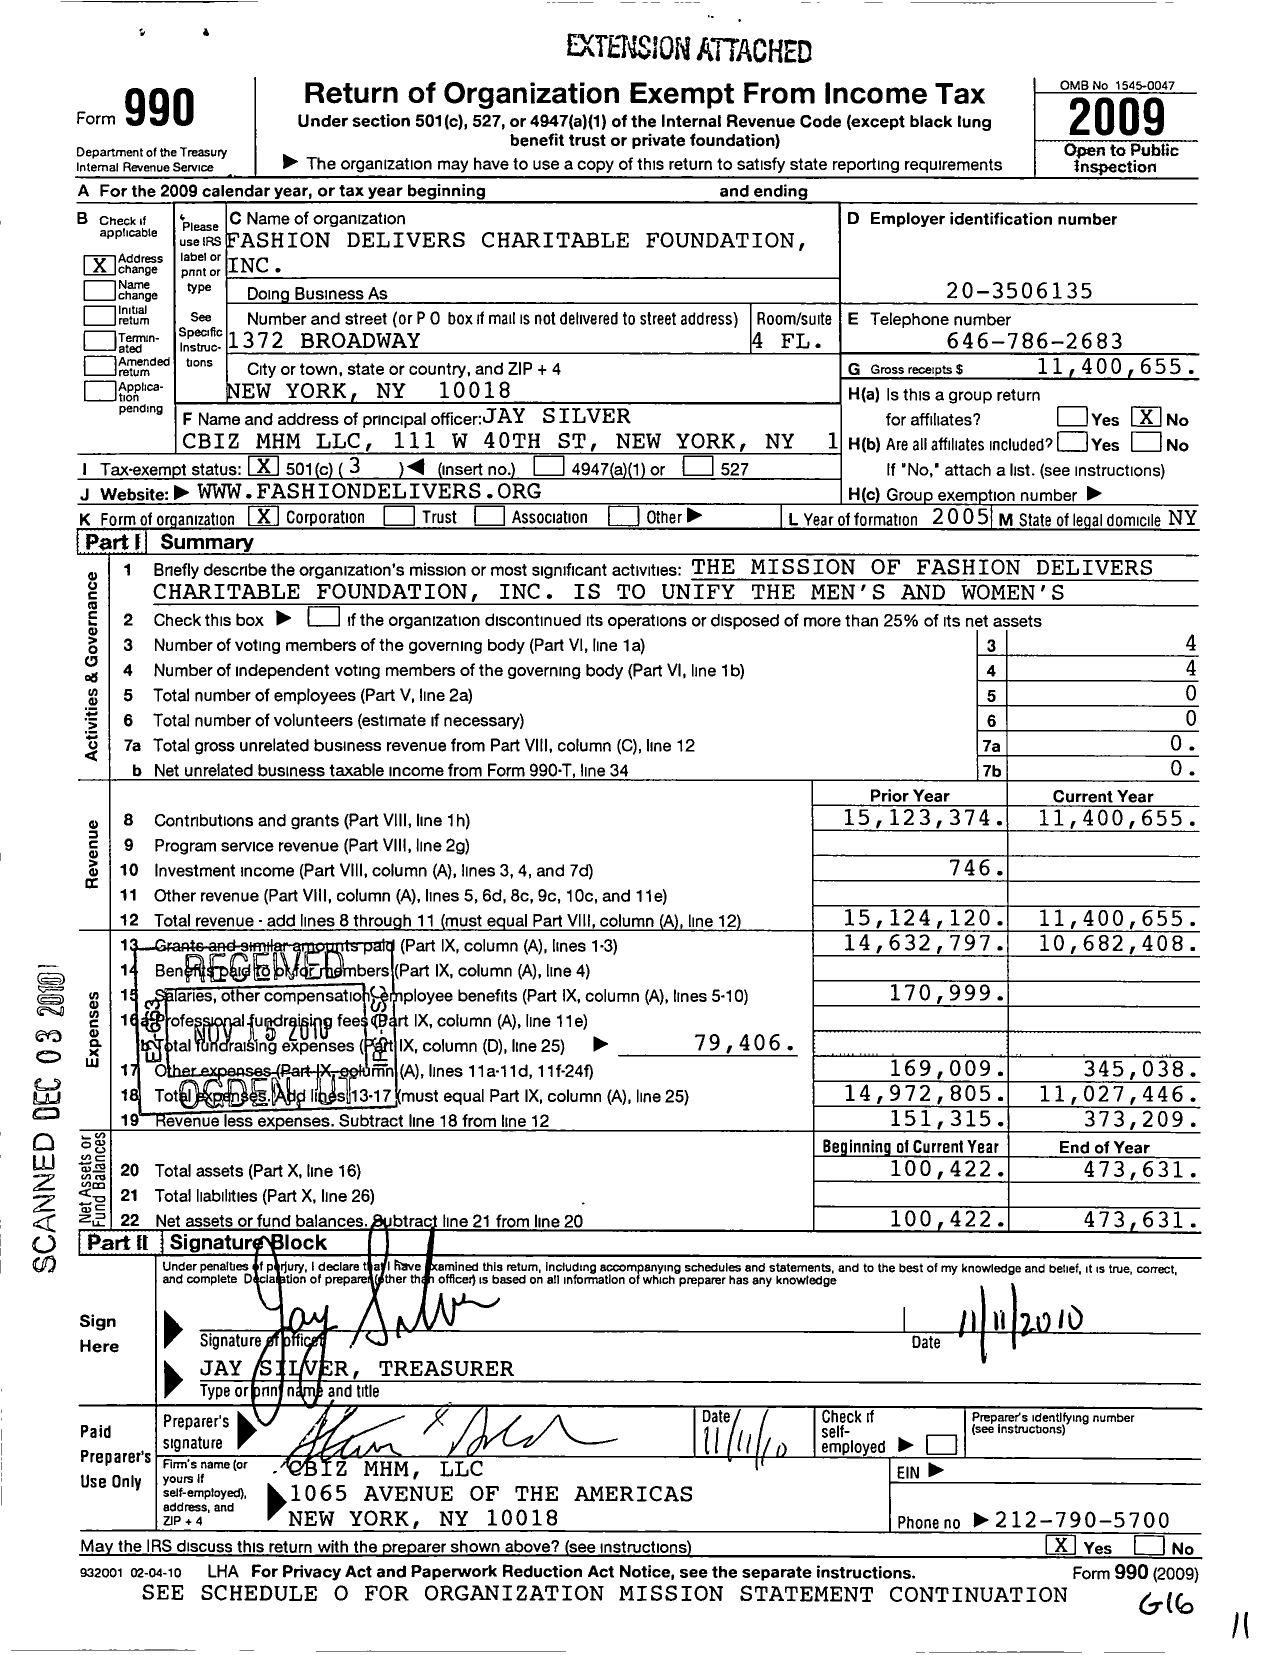 Image of first page of 2009 Form 990 for Fashion Delivers Charitable Foundation